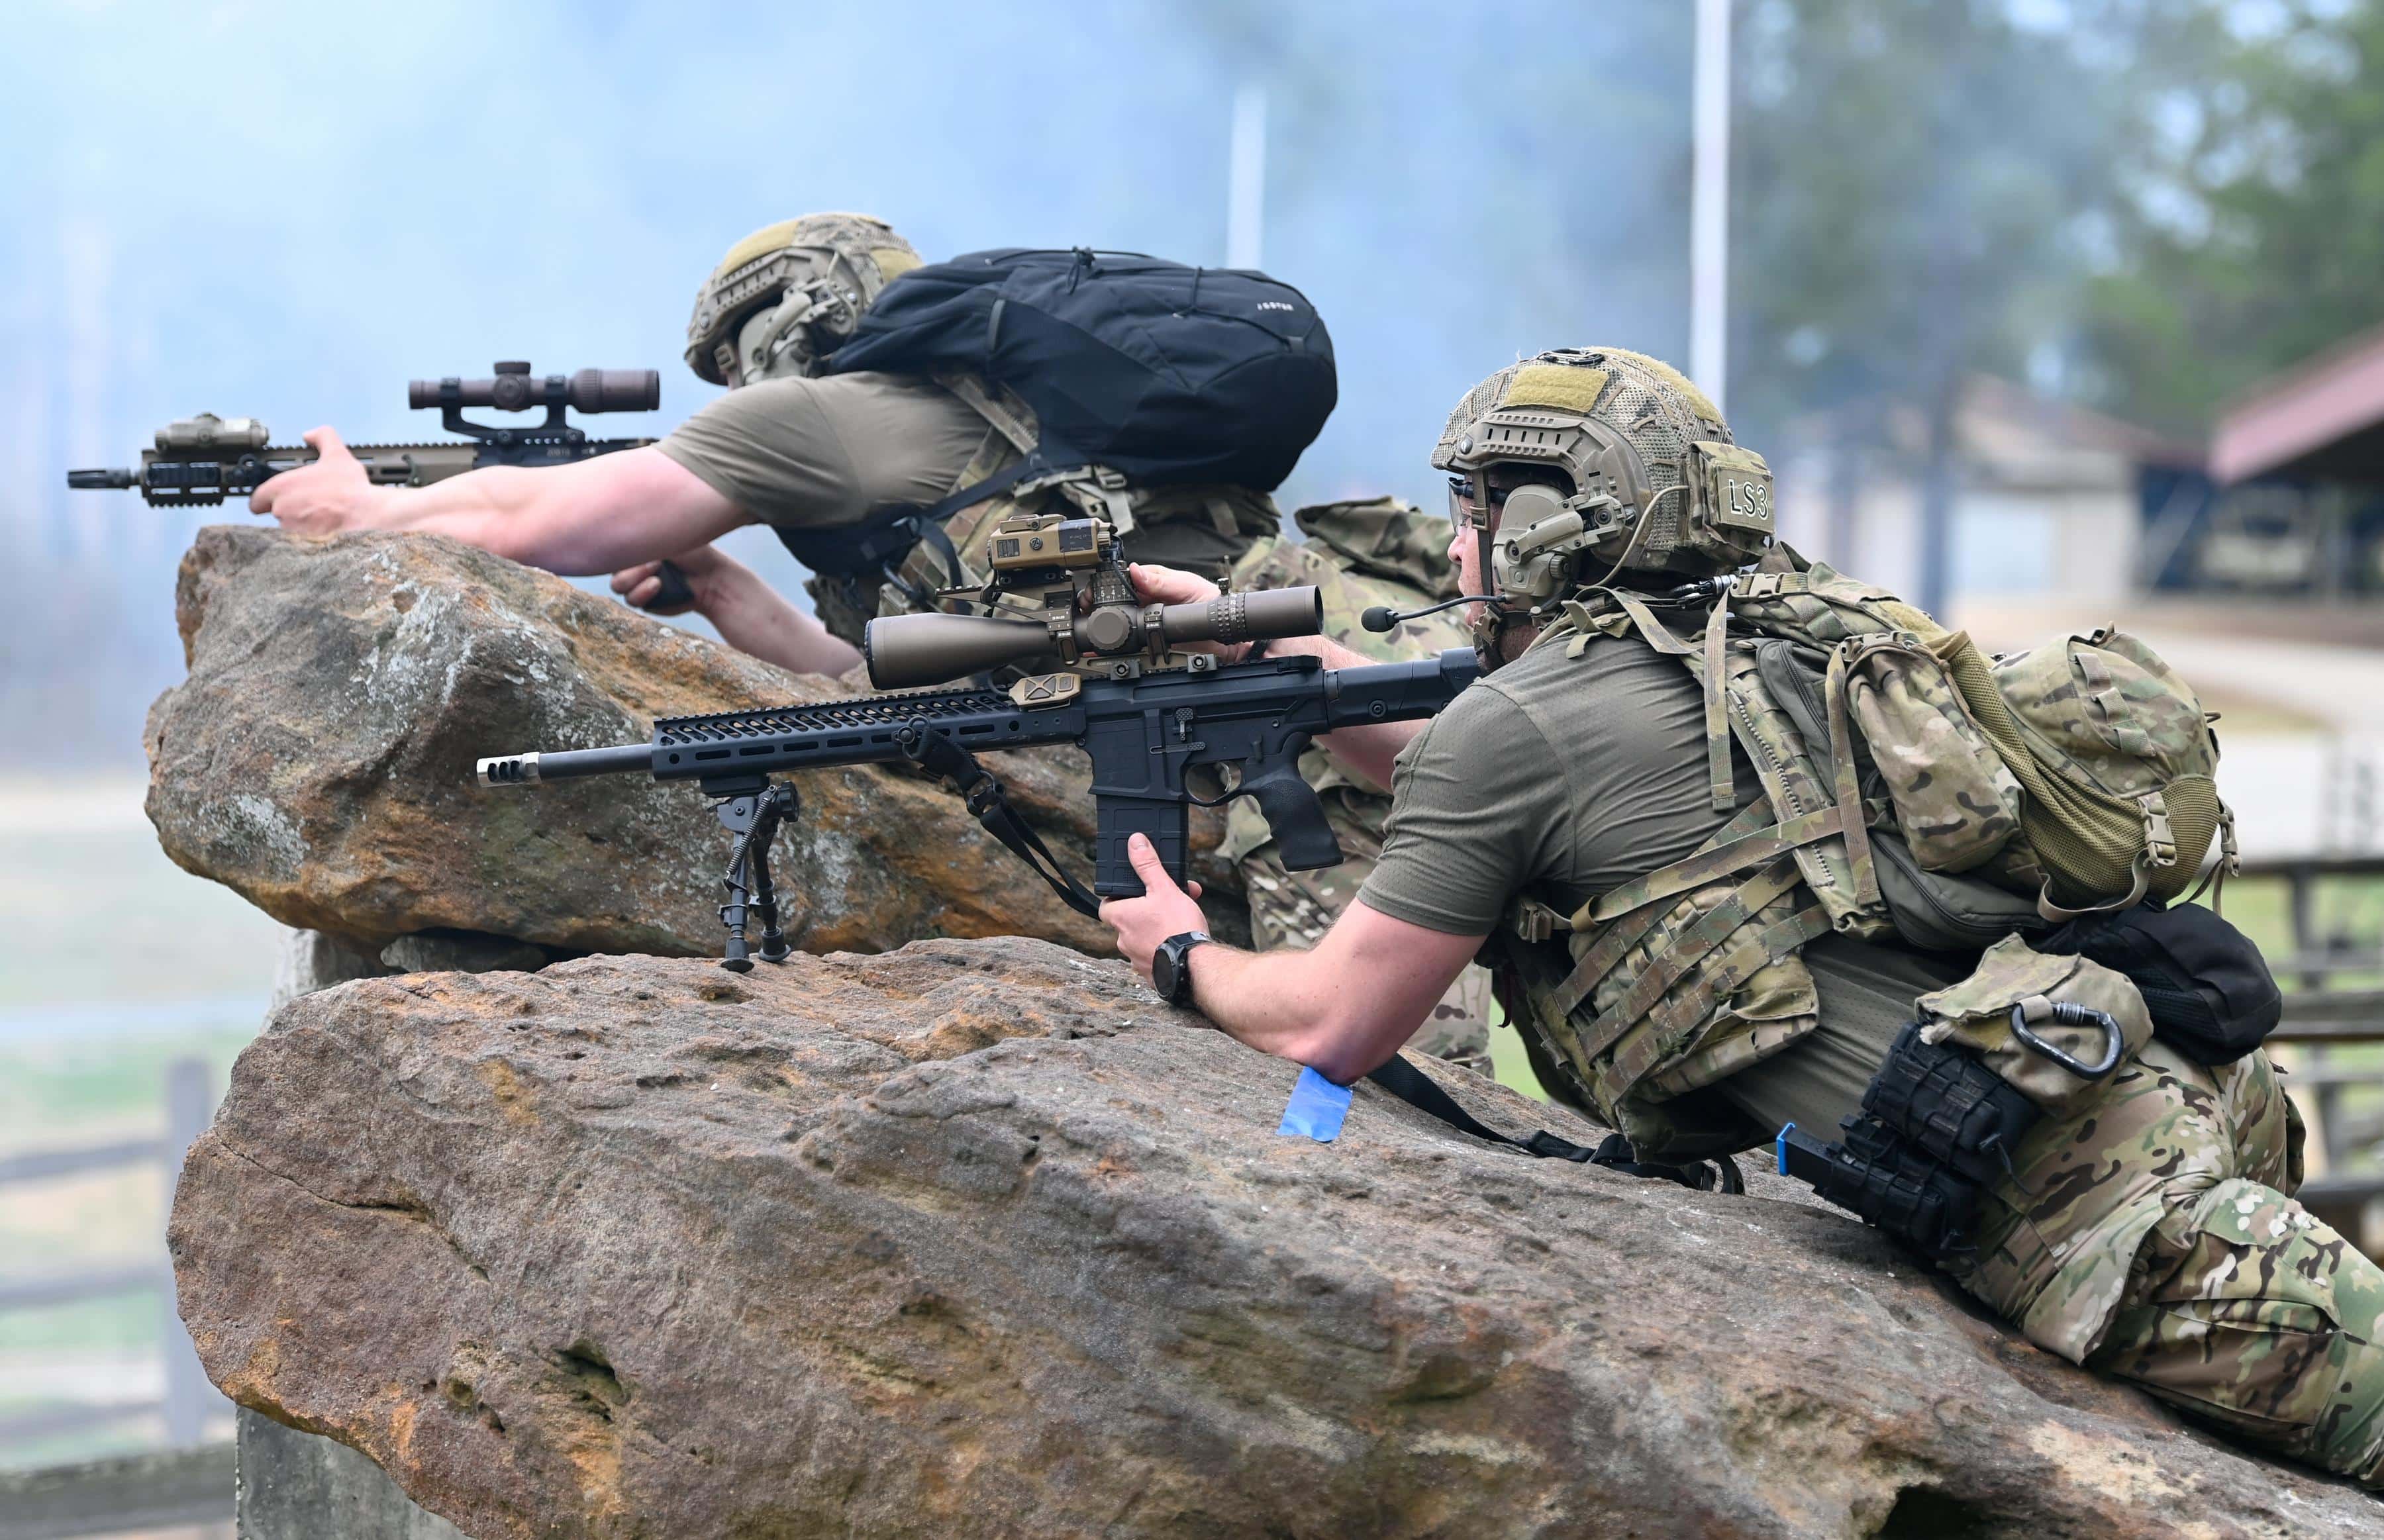 Competitors in the United States Army Special Operations Command (USASOC) International Sniper Competition, engage targets at Fort Bragg, North Carolina, March 22, 2021. Fifteen teams competed in the the 12th annual USASOC International Sniper Competition